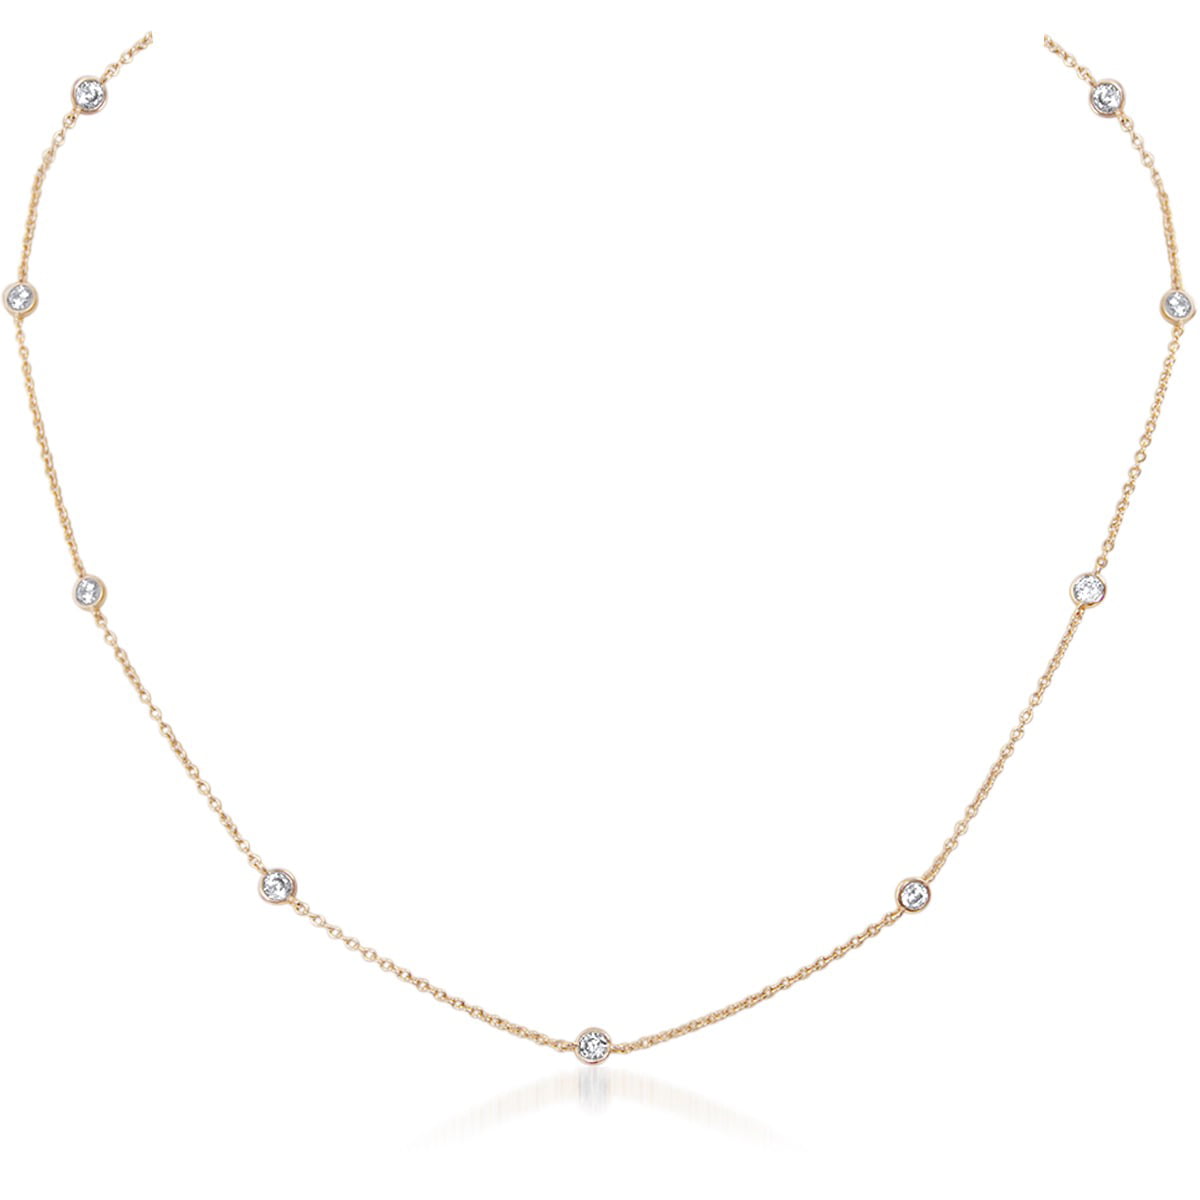 Simulated Diamond Station Necklace - Crystal CZ Cubic Zirconia Rhinestone  Dainty Delicate Chain, Gold-Tone